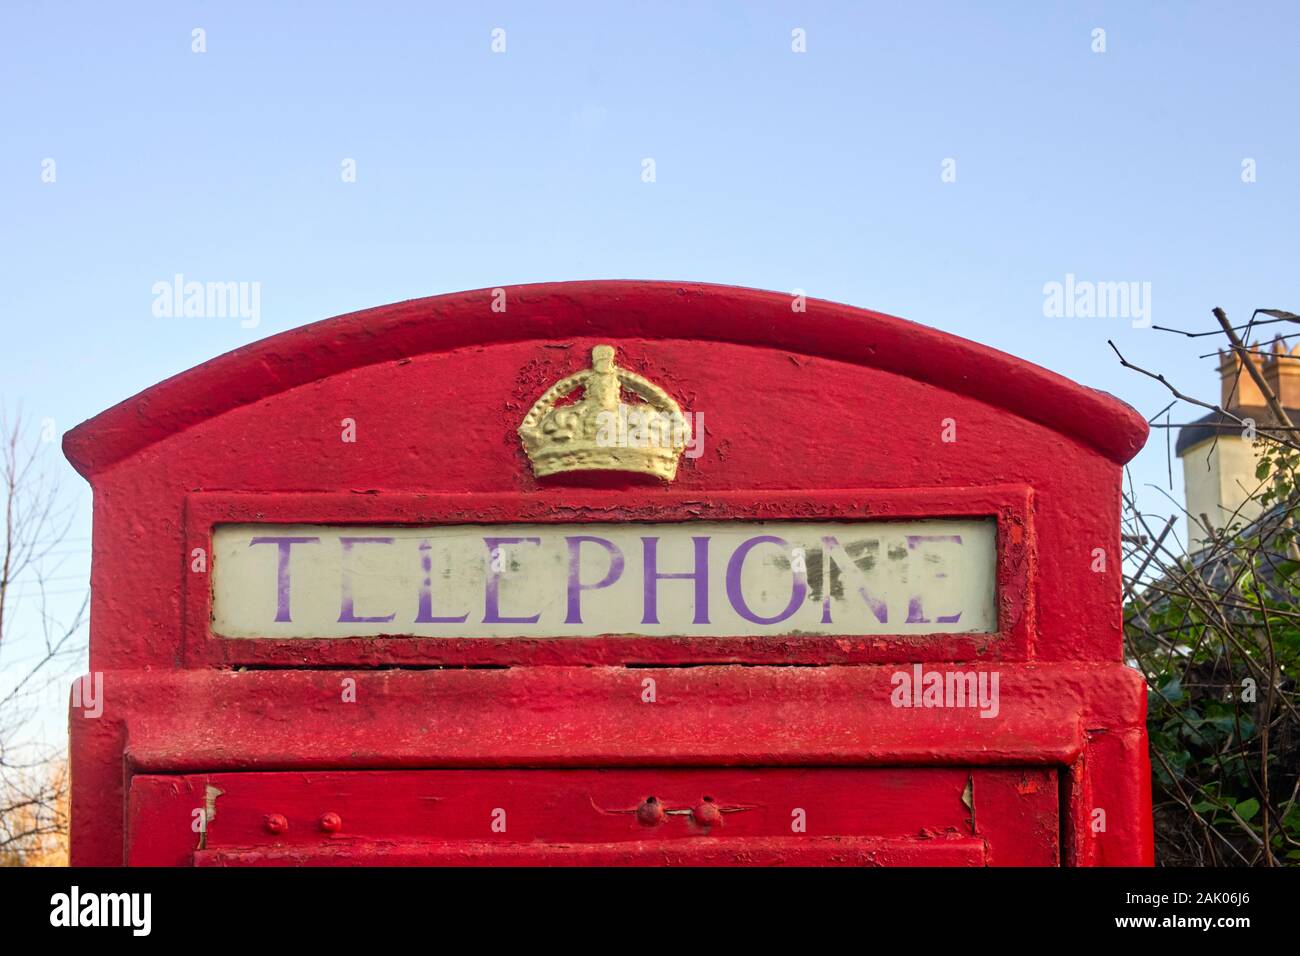 Red K6 phonebox in Bride village, Isle of Man showing detail of royal crown at the top Stock Photo